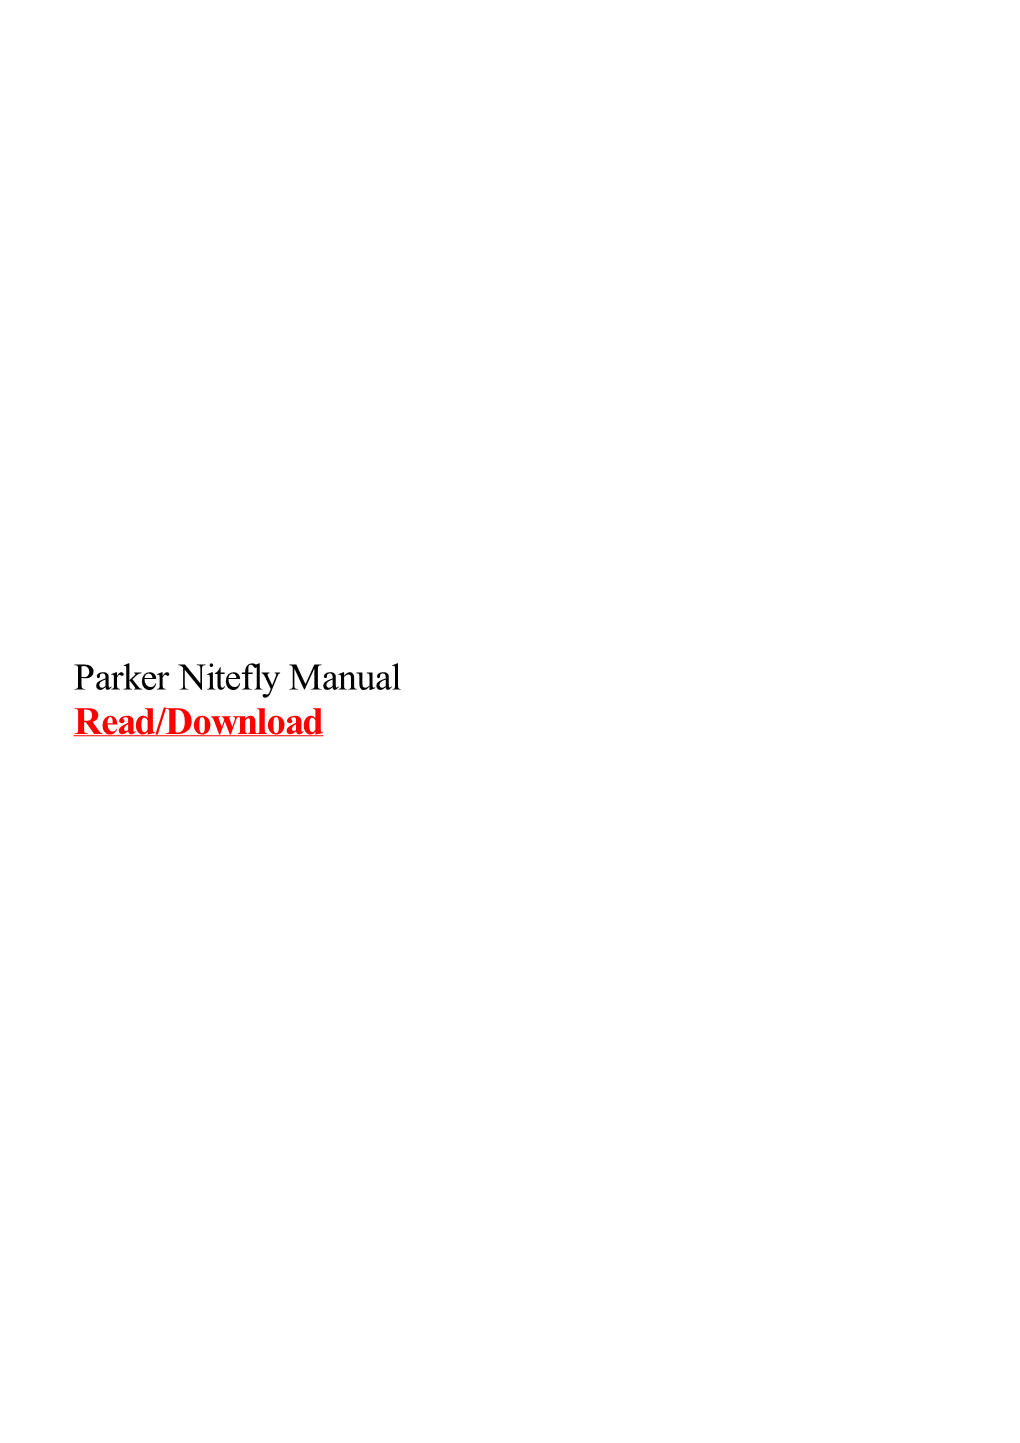 Parker Nitefly Manual